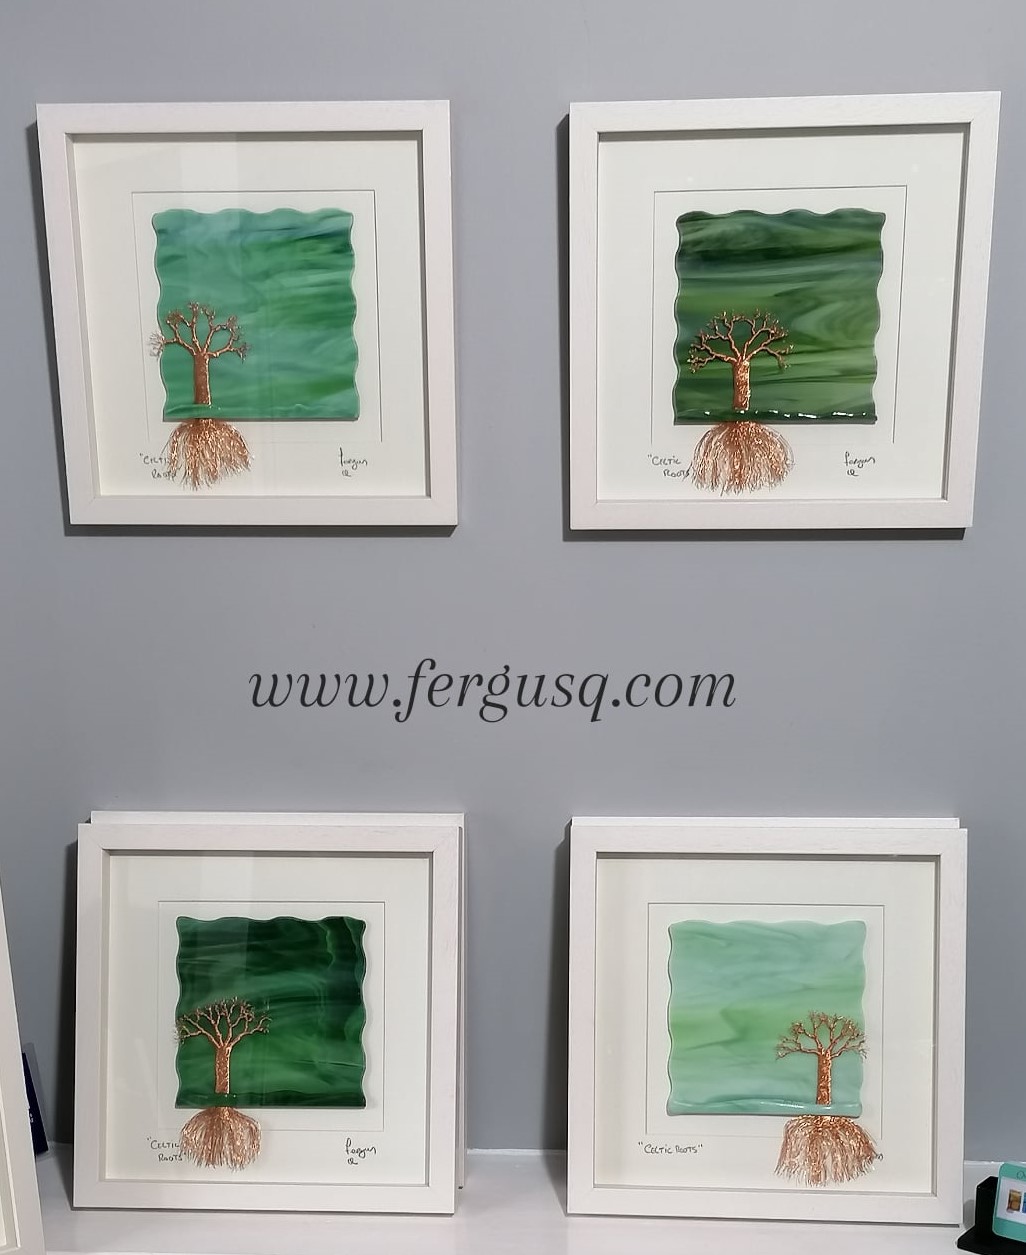 A Group of  "Celtic Roots" Glass Art pictures Different shades of Green with a handmade Copper wire tree with roots.